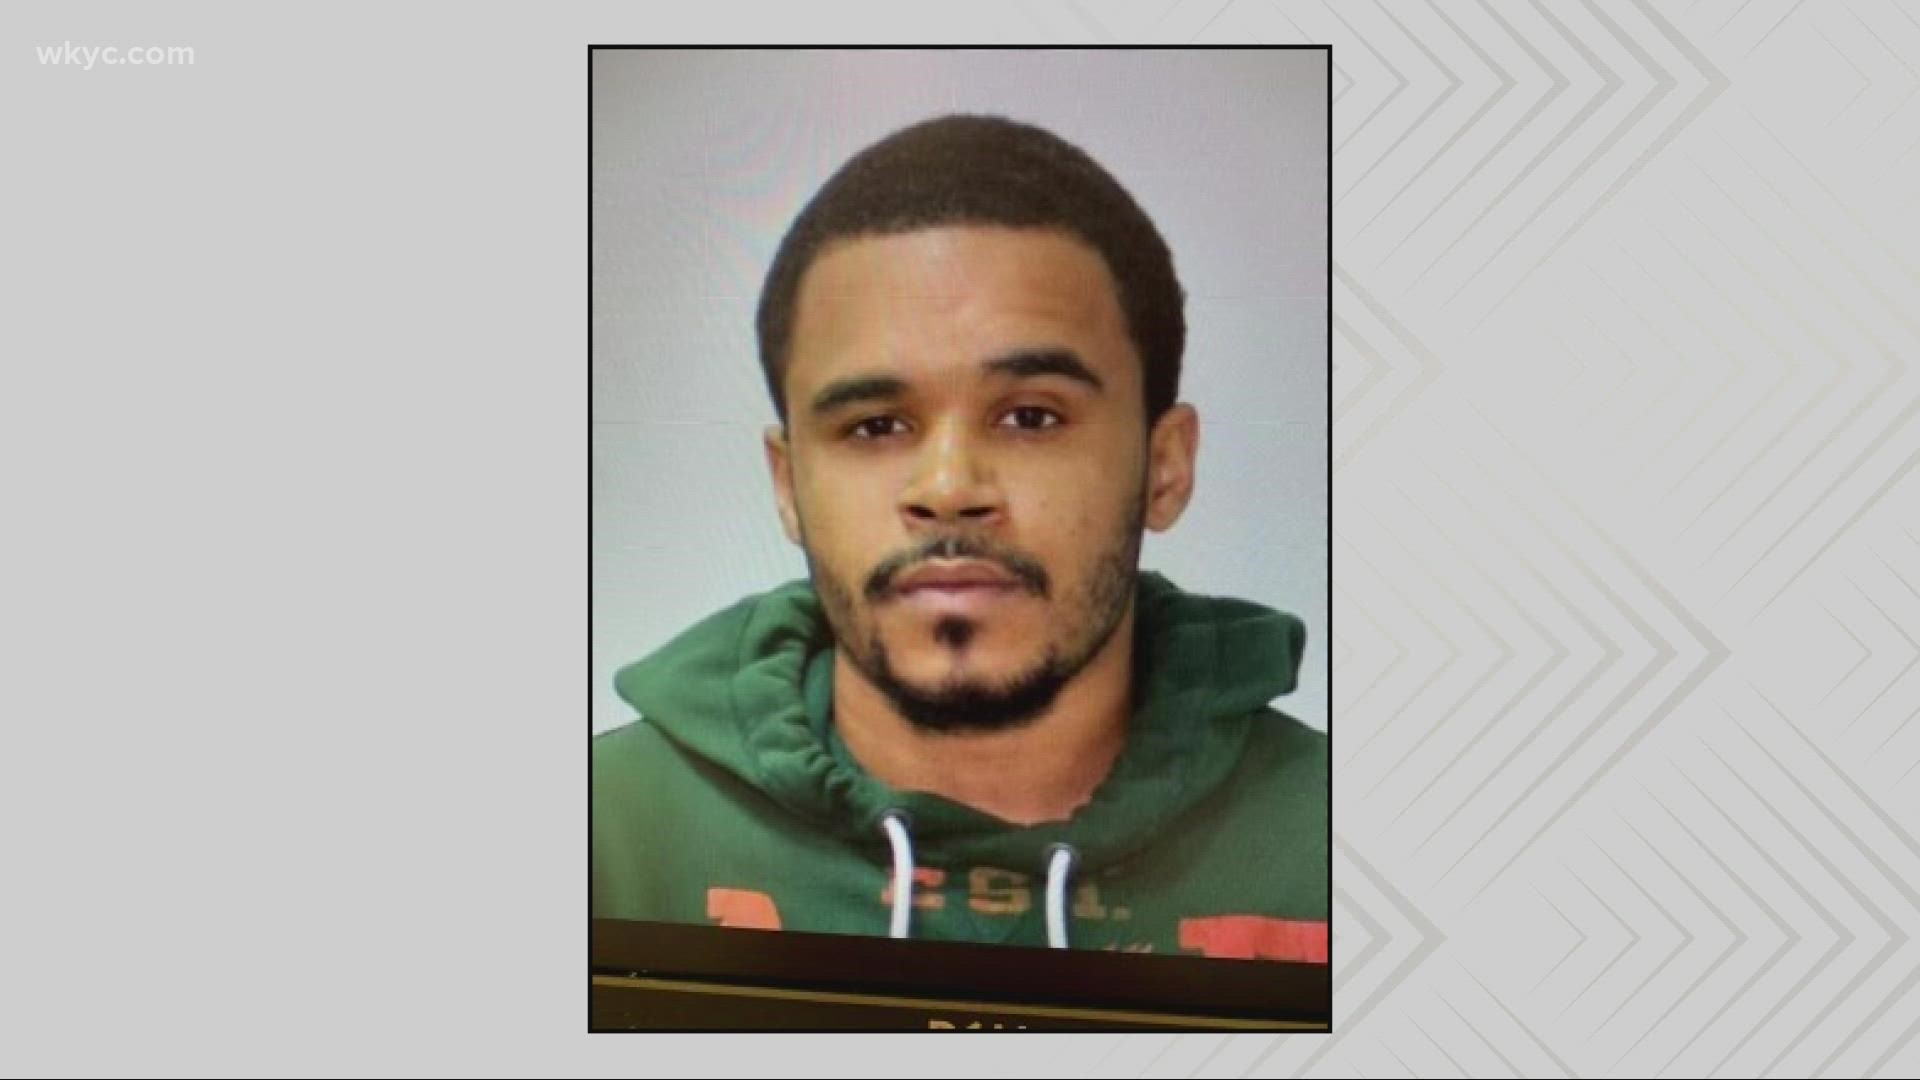 The Cleveland Division of Police has identified 28-year-old Deonte Fudge as a wanted suspect.